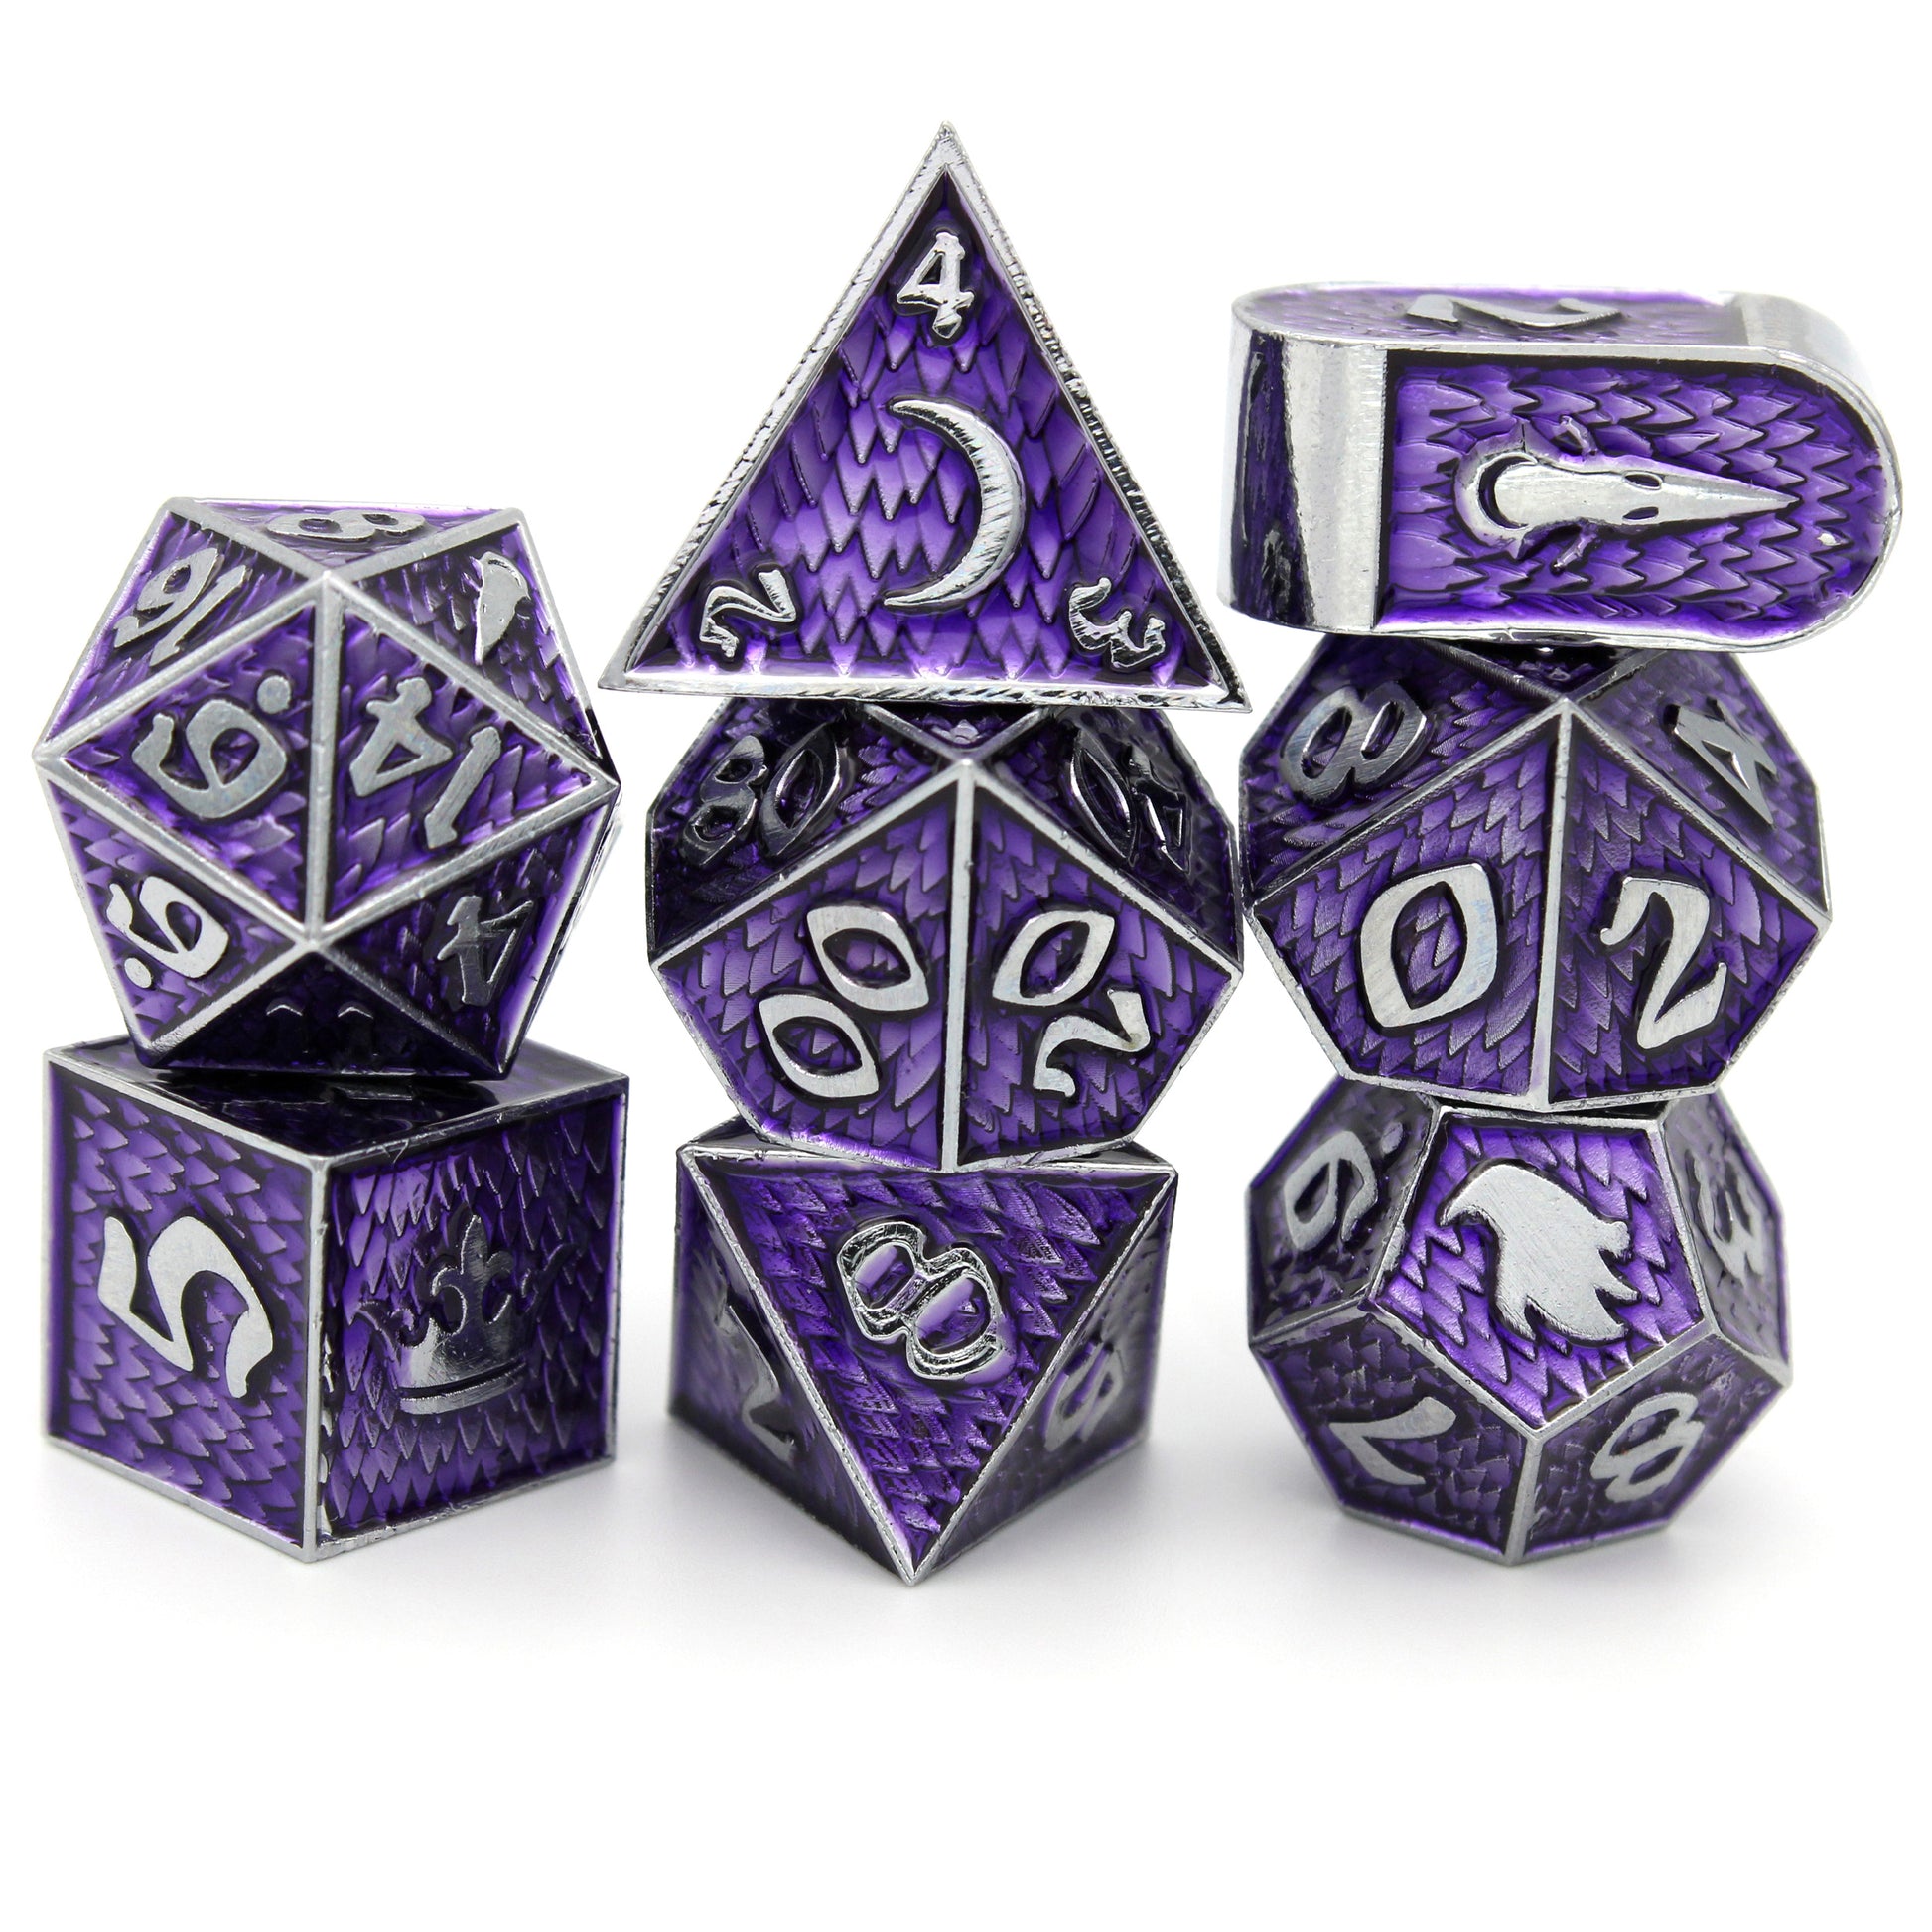 Pactbound is an 8-piece Dice Envy exclusive set of silver metal dice in our Raven Queen mold, cloaked in warlock purple ink.